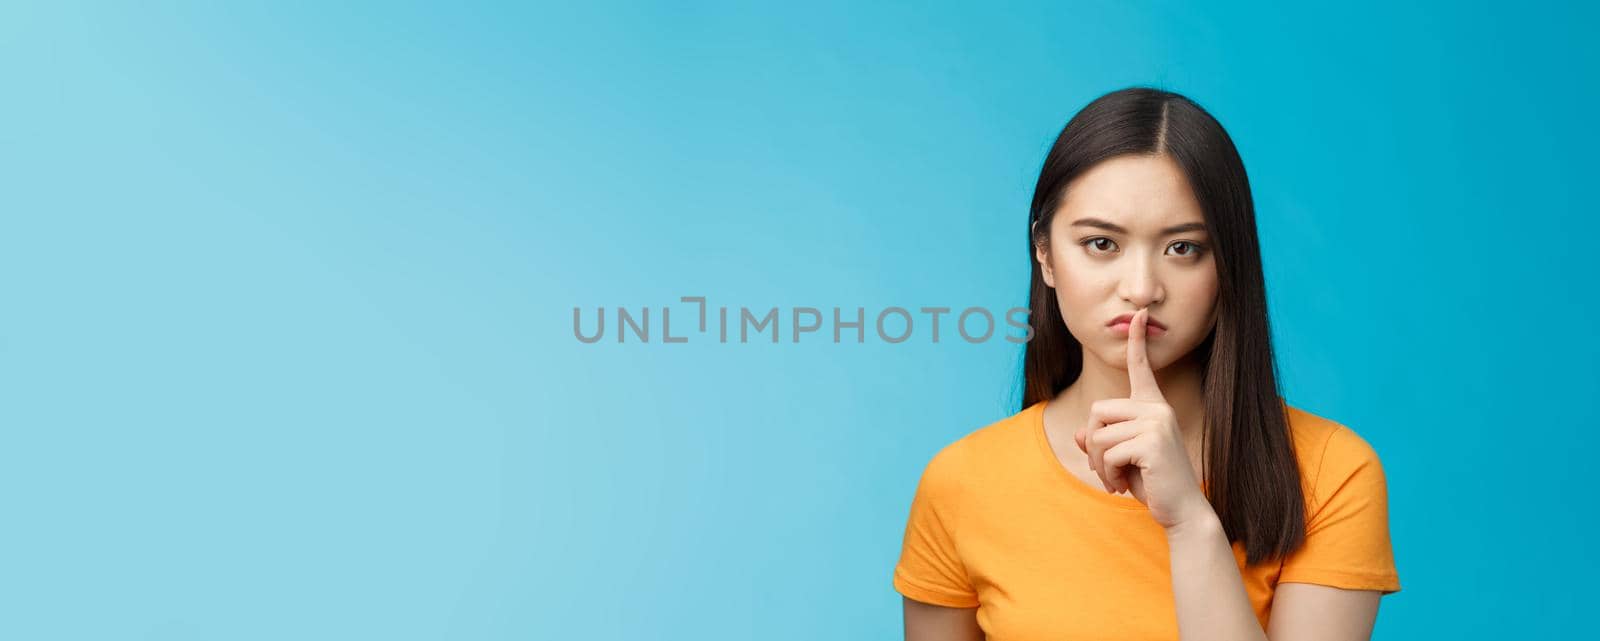 Hush stay silent. Serious-looking asian girl look displeased grumpy show shush sign press index finger lips, frowning upset, telling not speak, untell secret, prohibit loud music, blue background.